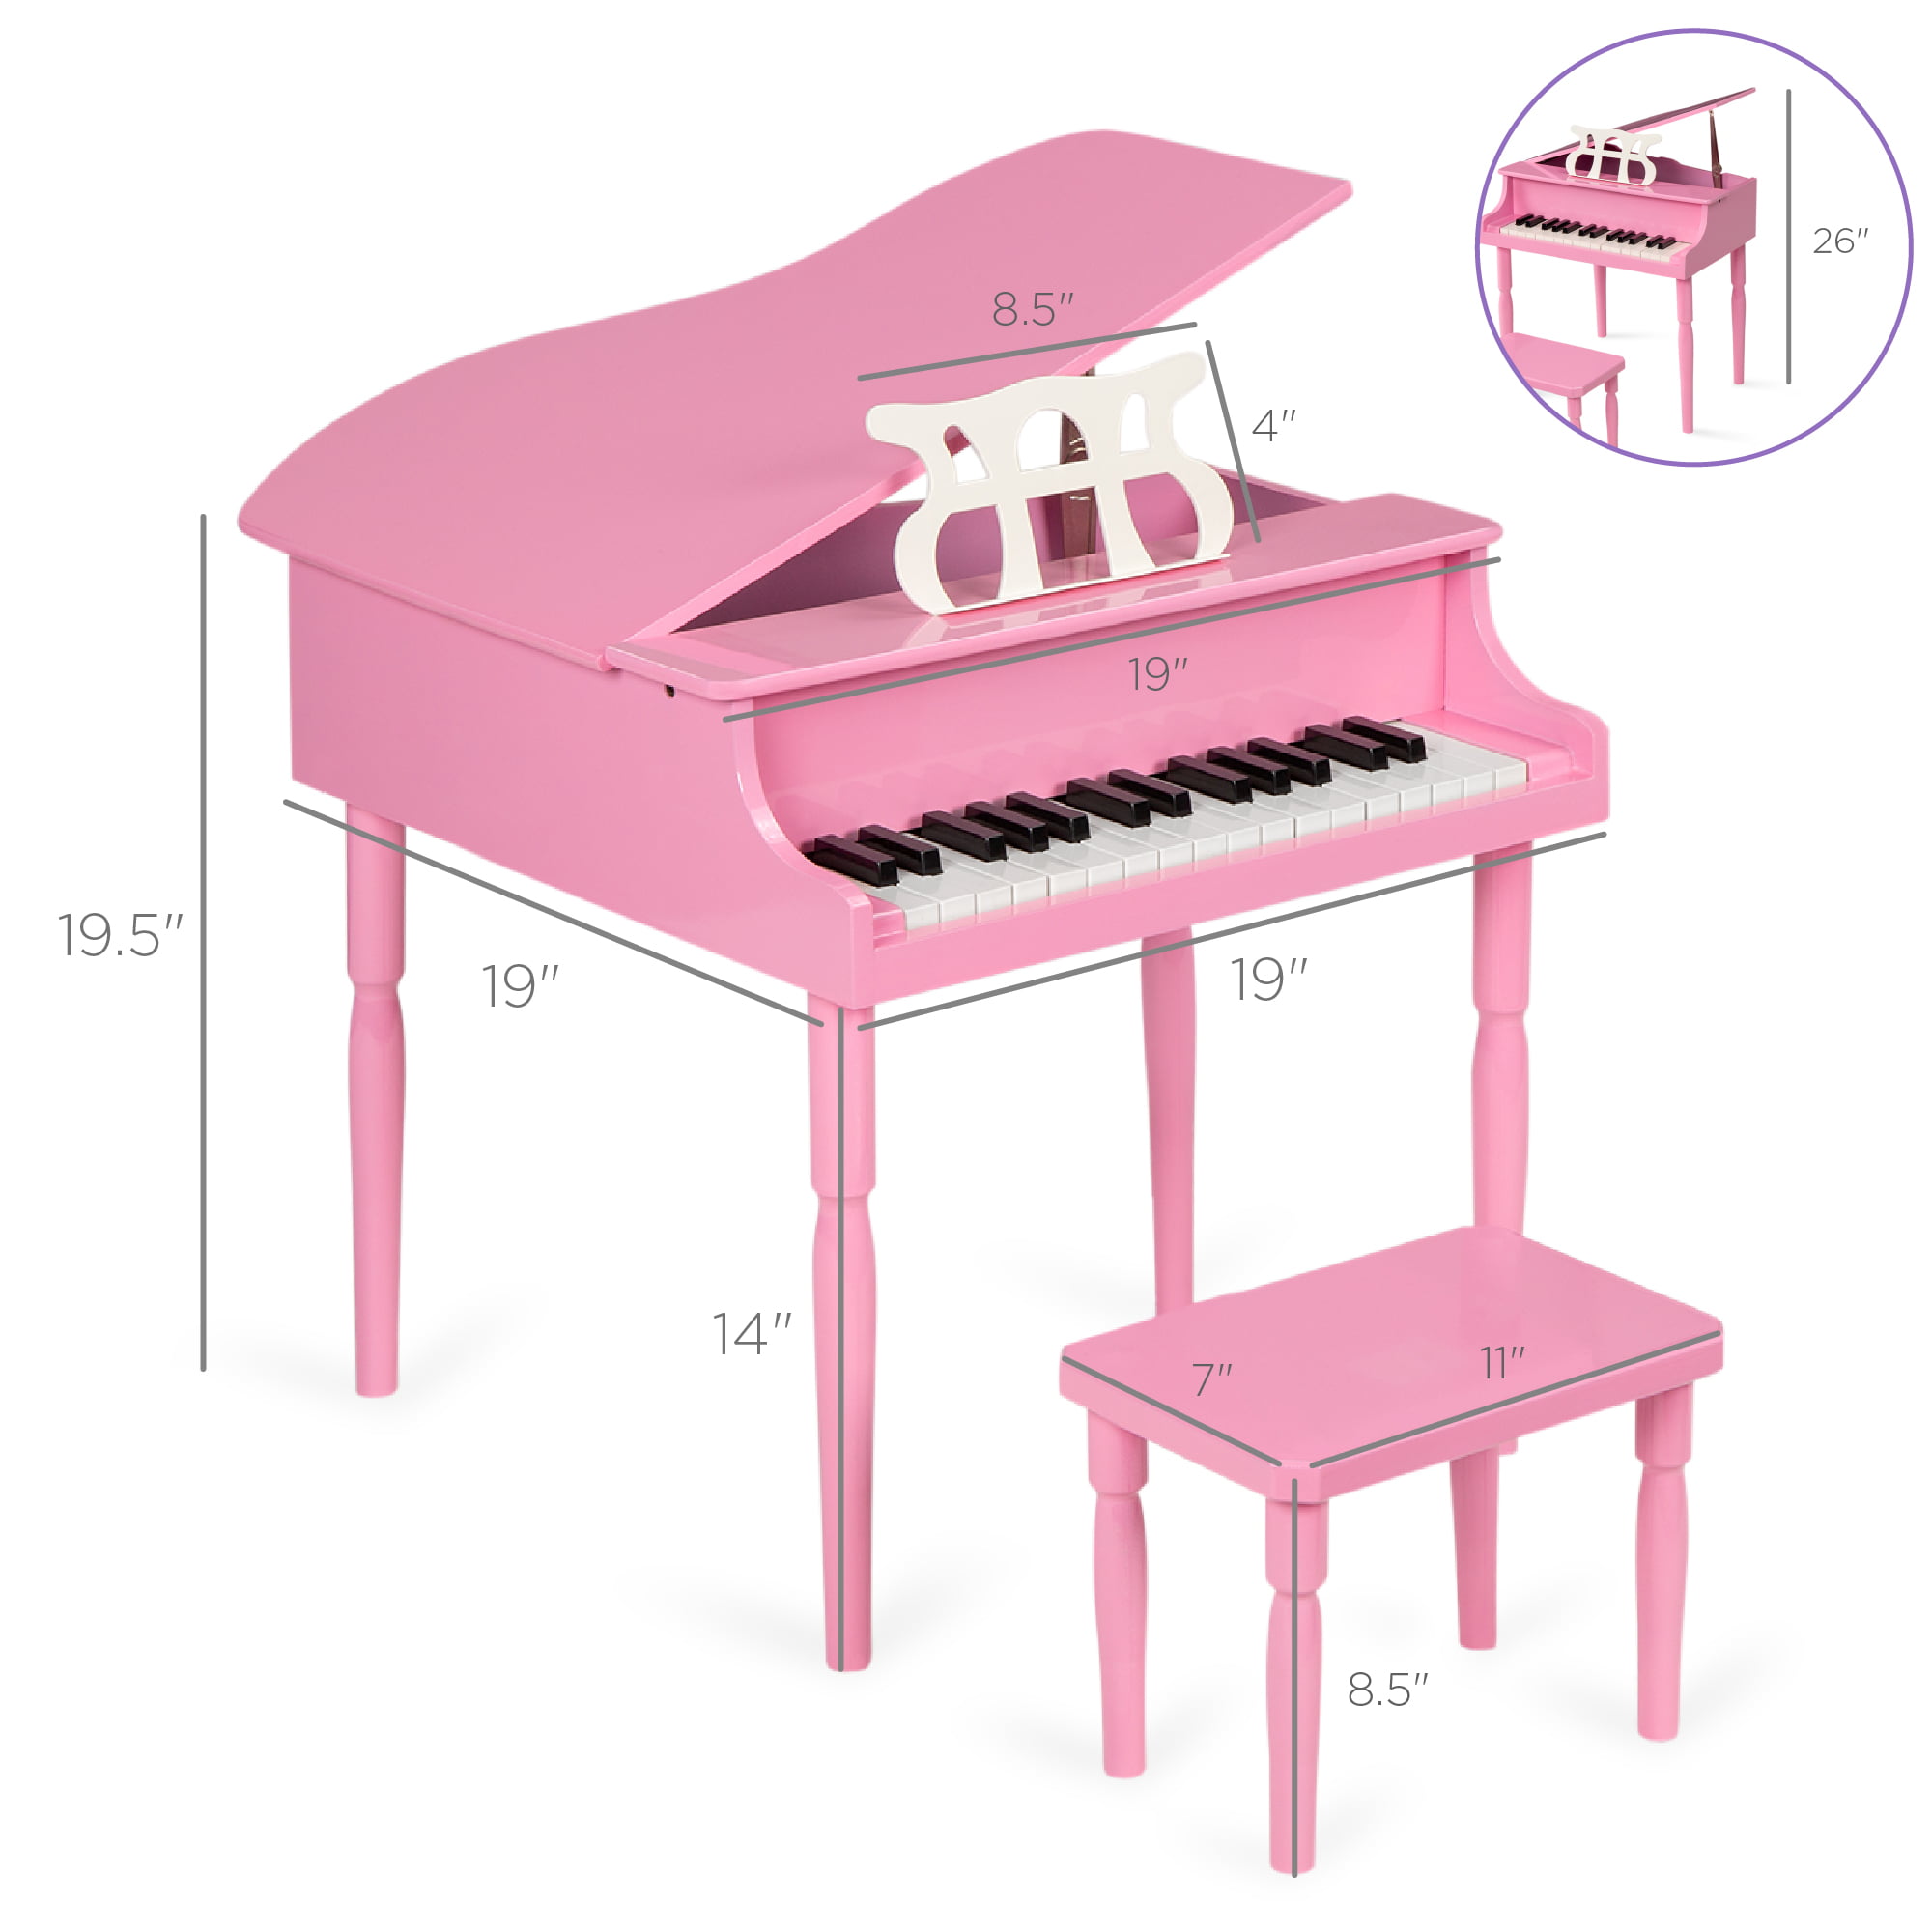 30 Keys Early Education Pink Wooden Happy Grand Piano for Toddlers /& Children